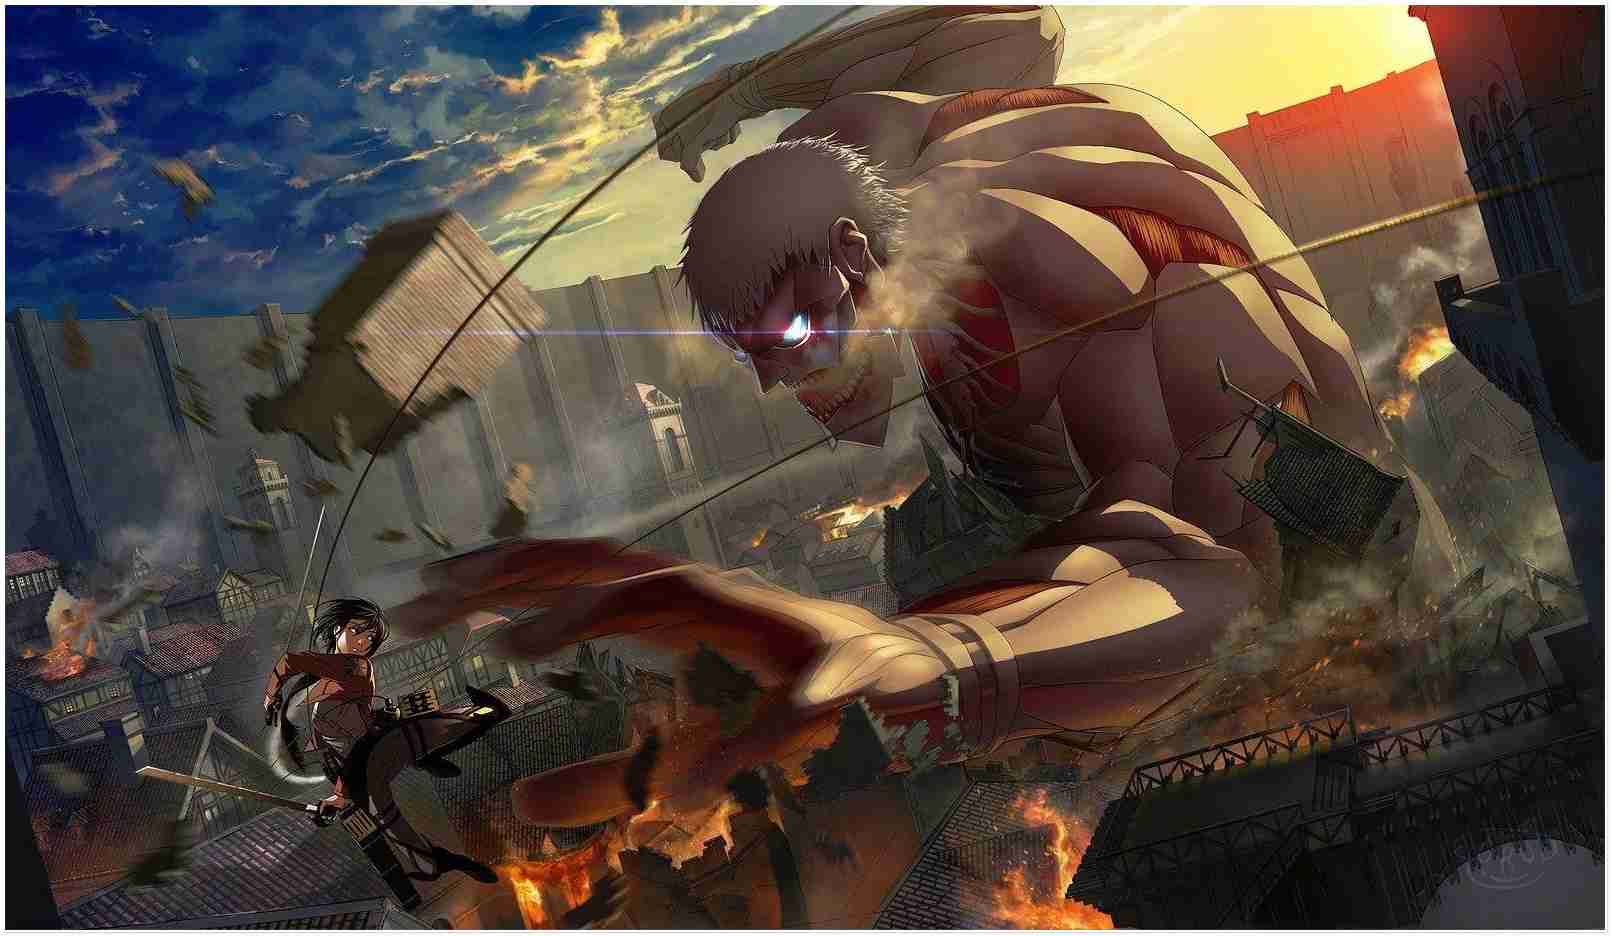 Most popular 17 attack on titan wallpaper latest Update Wallpaper Wise